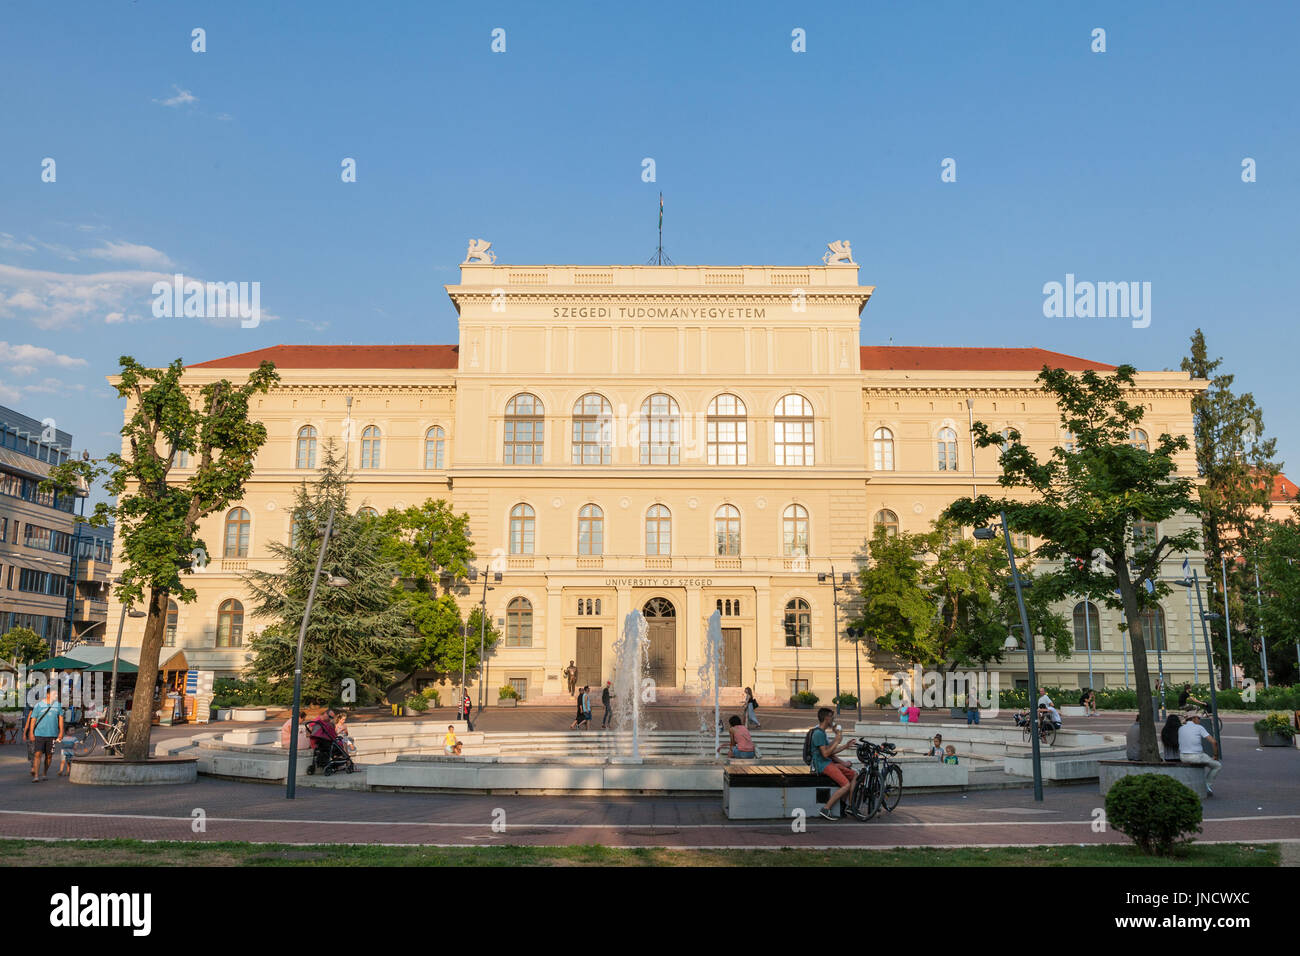 SZEGED, HUNGARY - JULY 20, 2017: Main Building of Szeged University, on the Dugonics Ter Square, taken during a summer afternoon   Picture of the Univ Stock Photo